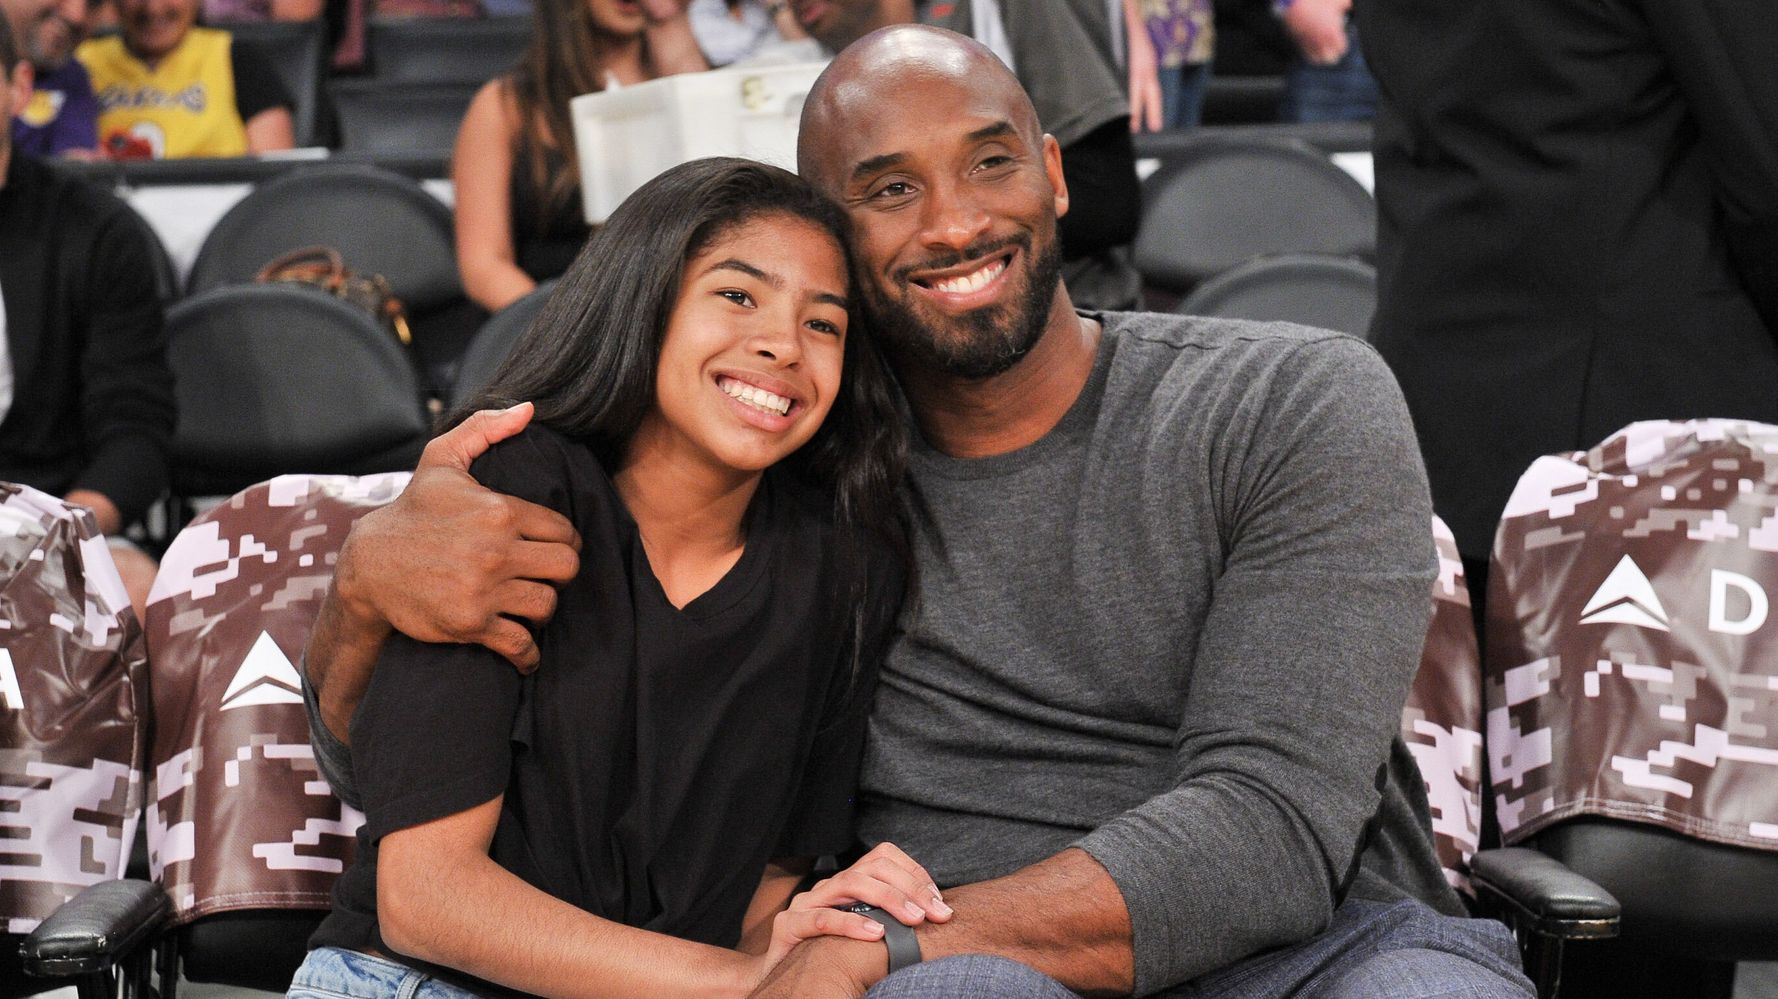 Kobe Is One Of The Fastest Rising Baby Names In The U.S.